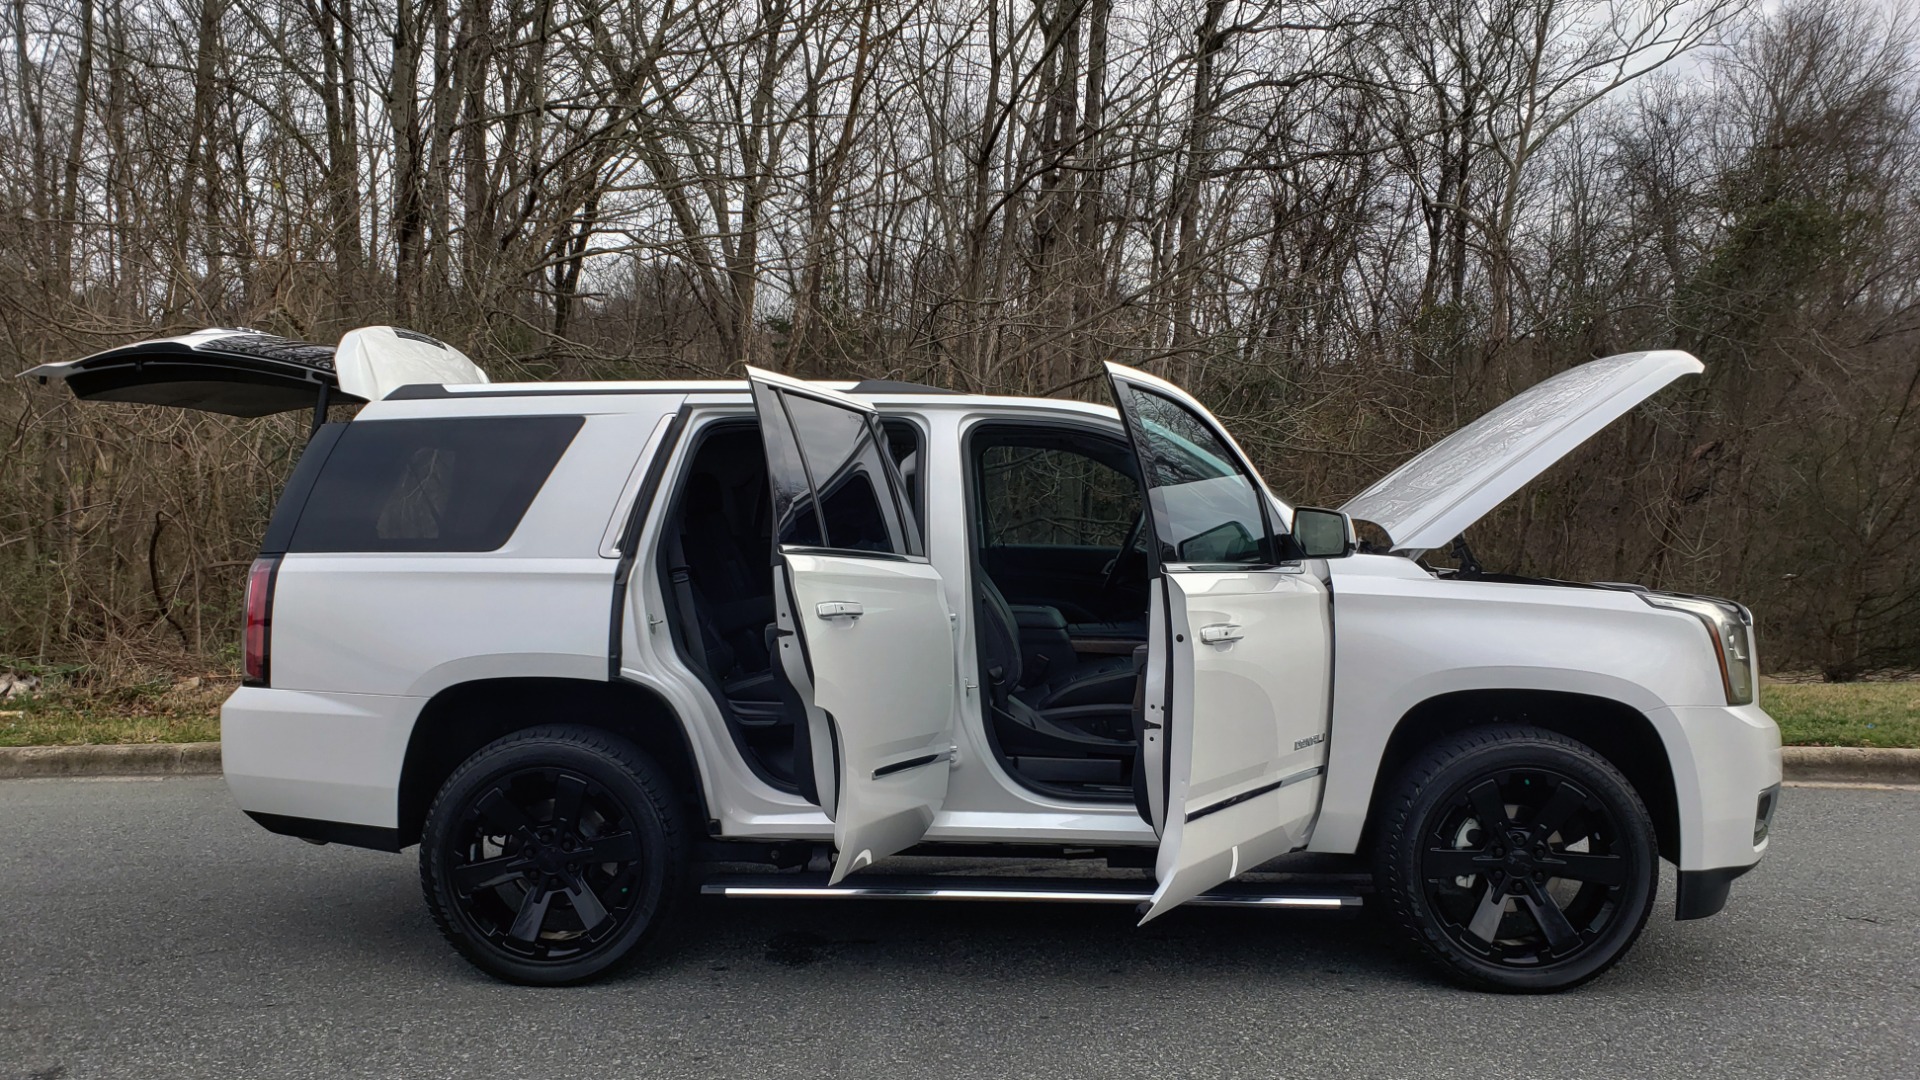 Used 2018 GMC YUKON DENALI 4WD / NAV / SUNROOF / BOSE / 3-ROW / REARVIEW for sale Sold at Formula Imports in Charlotte NC 28227 9